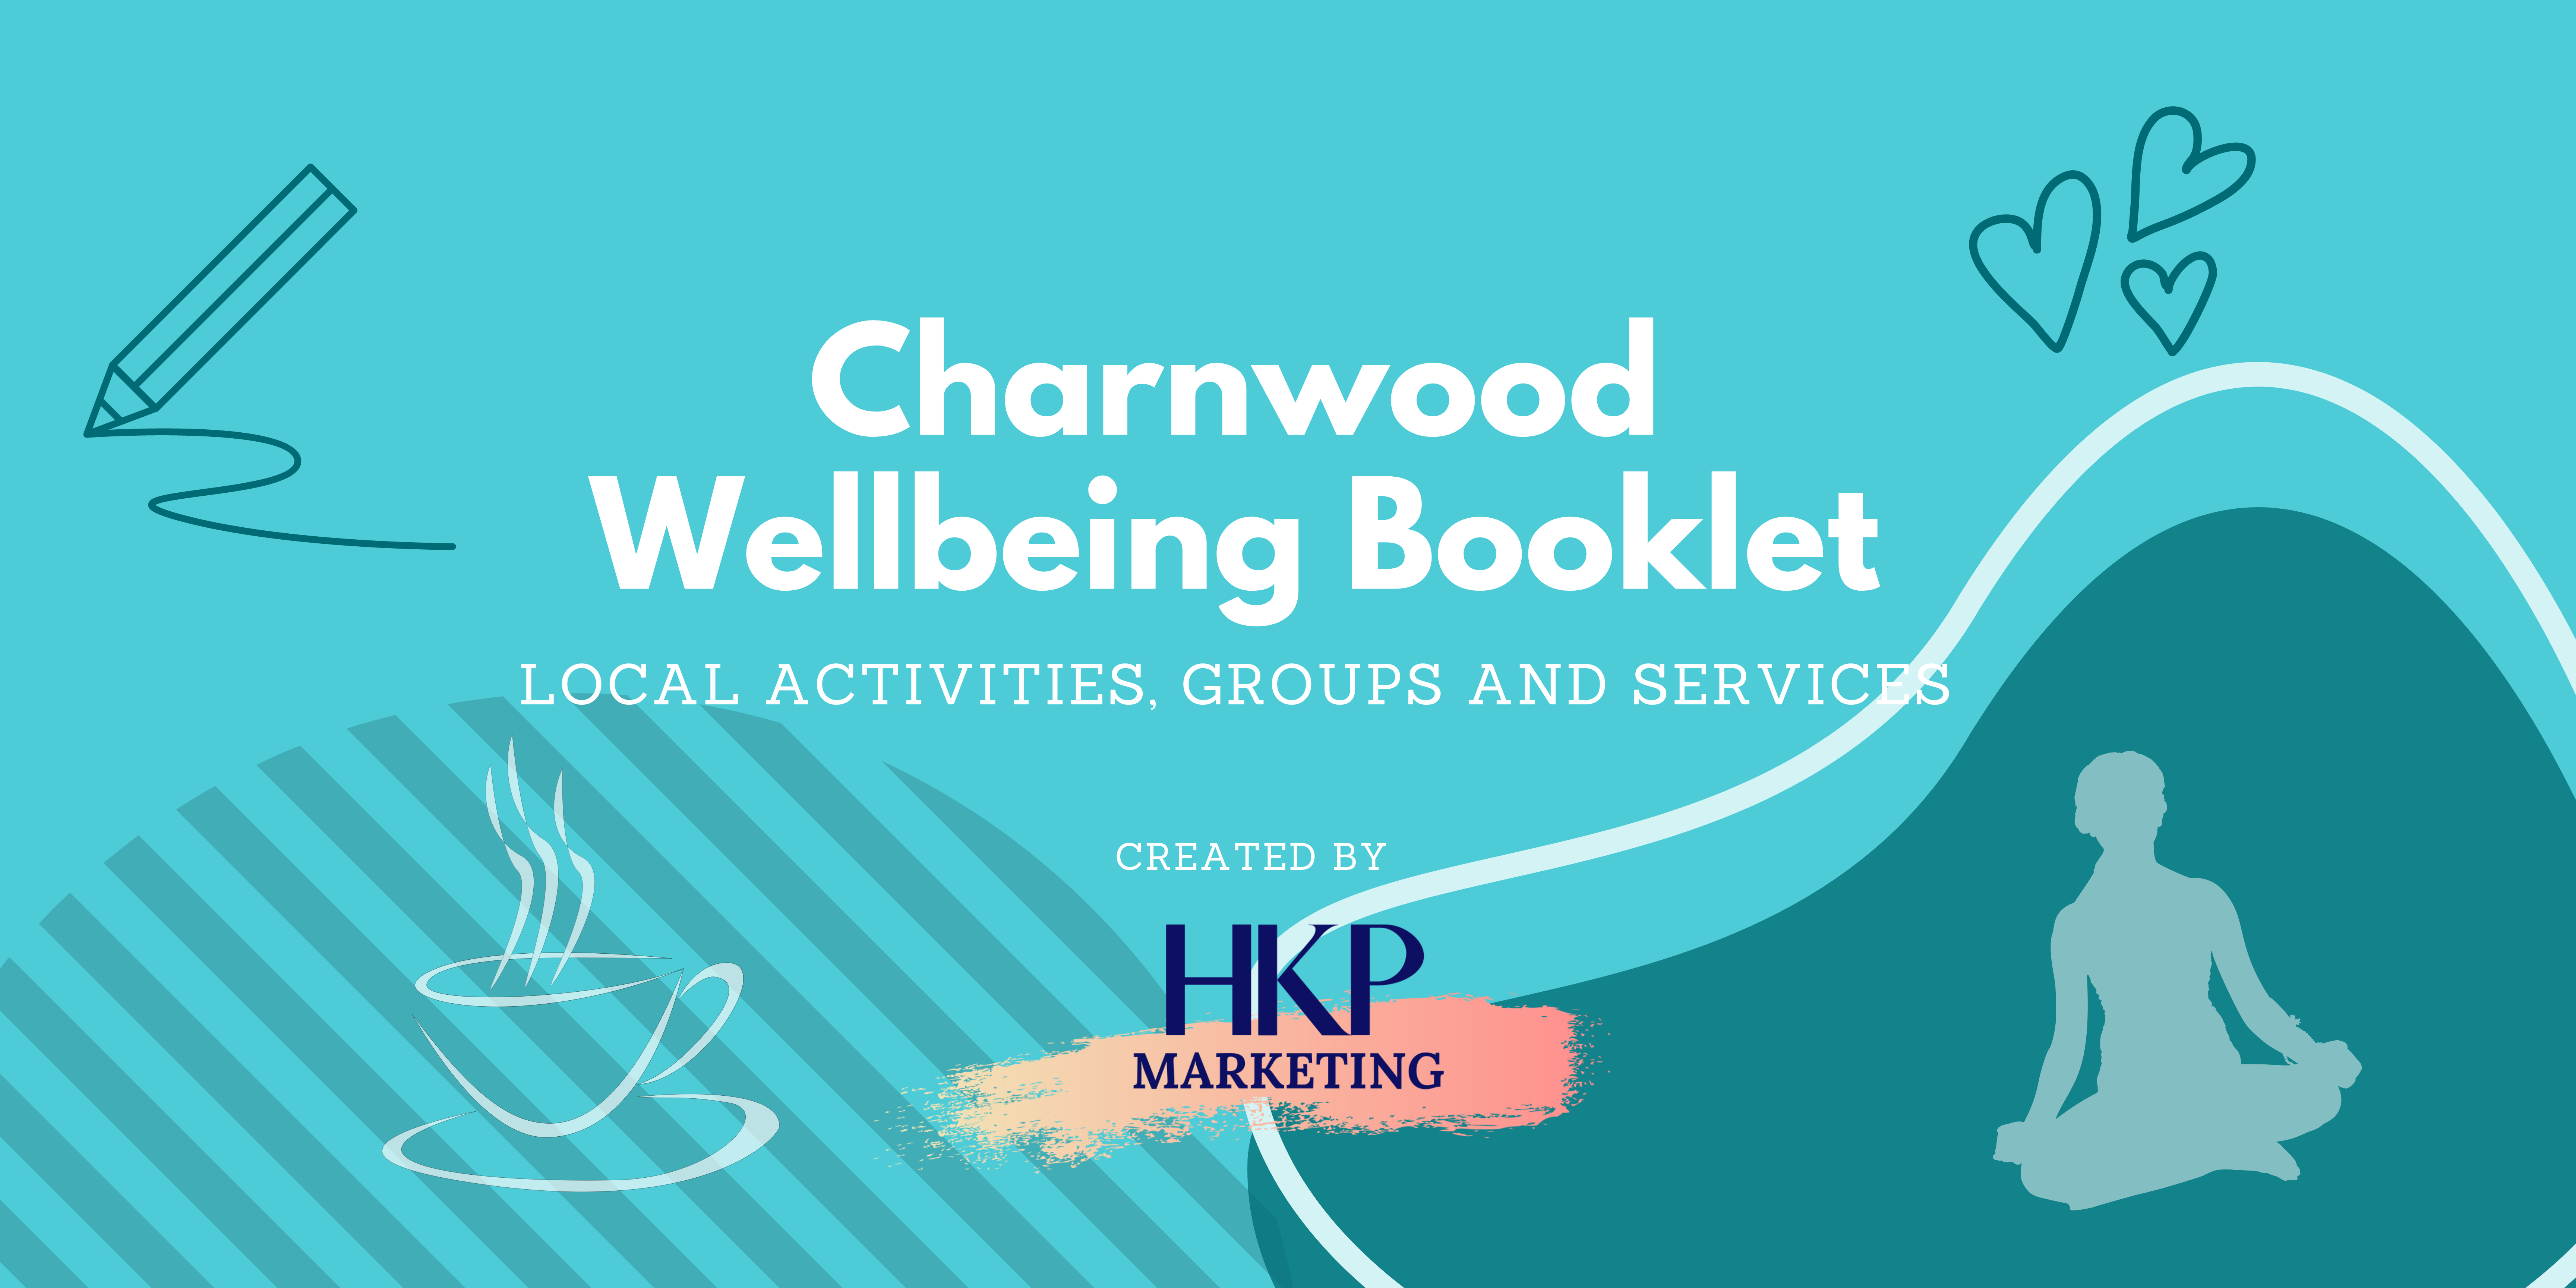 Charnwood Wellbeing Booklet